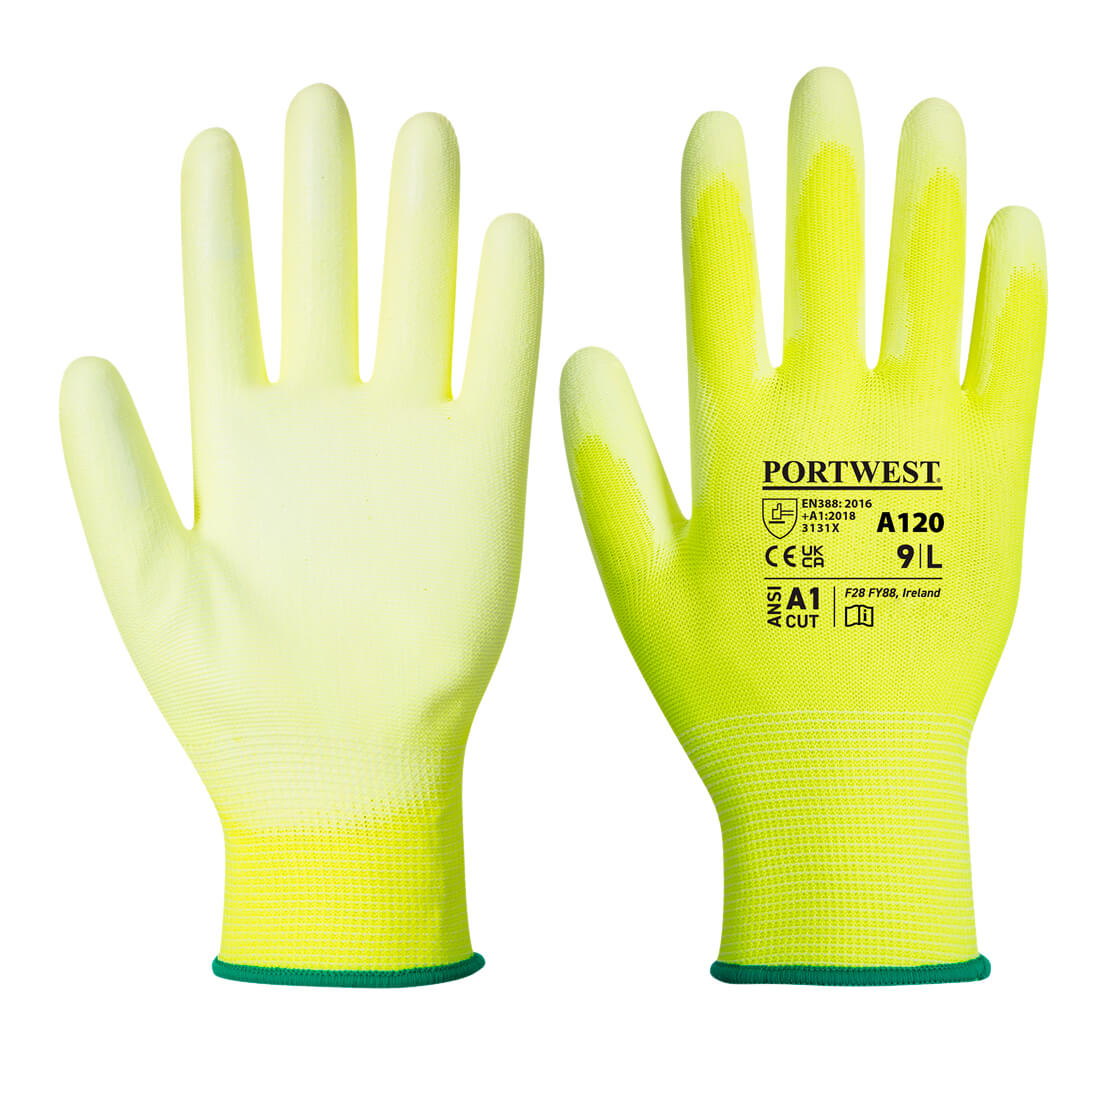 A120 Portwest® PU Coated A1 Grippy Work Gloves - Yellow